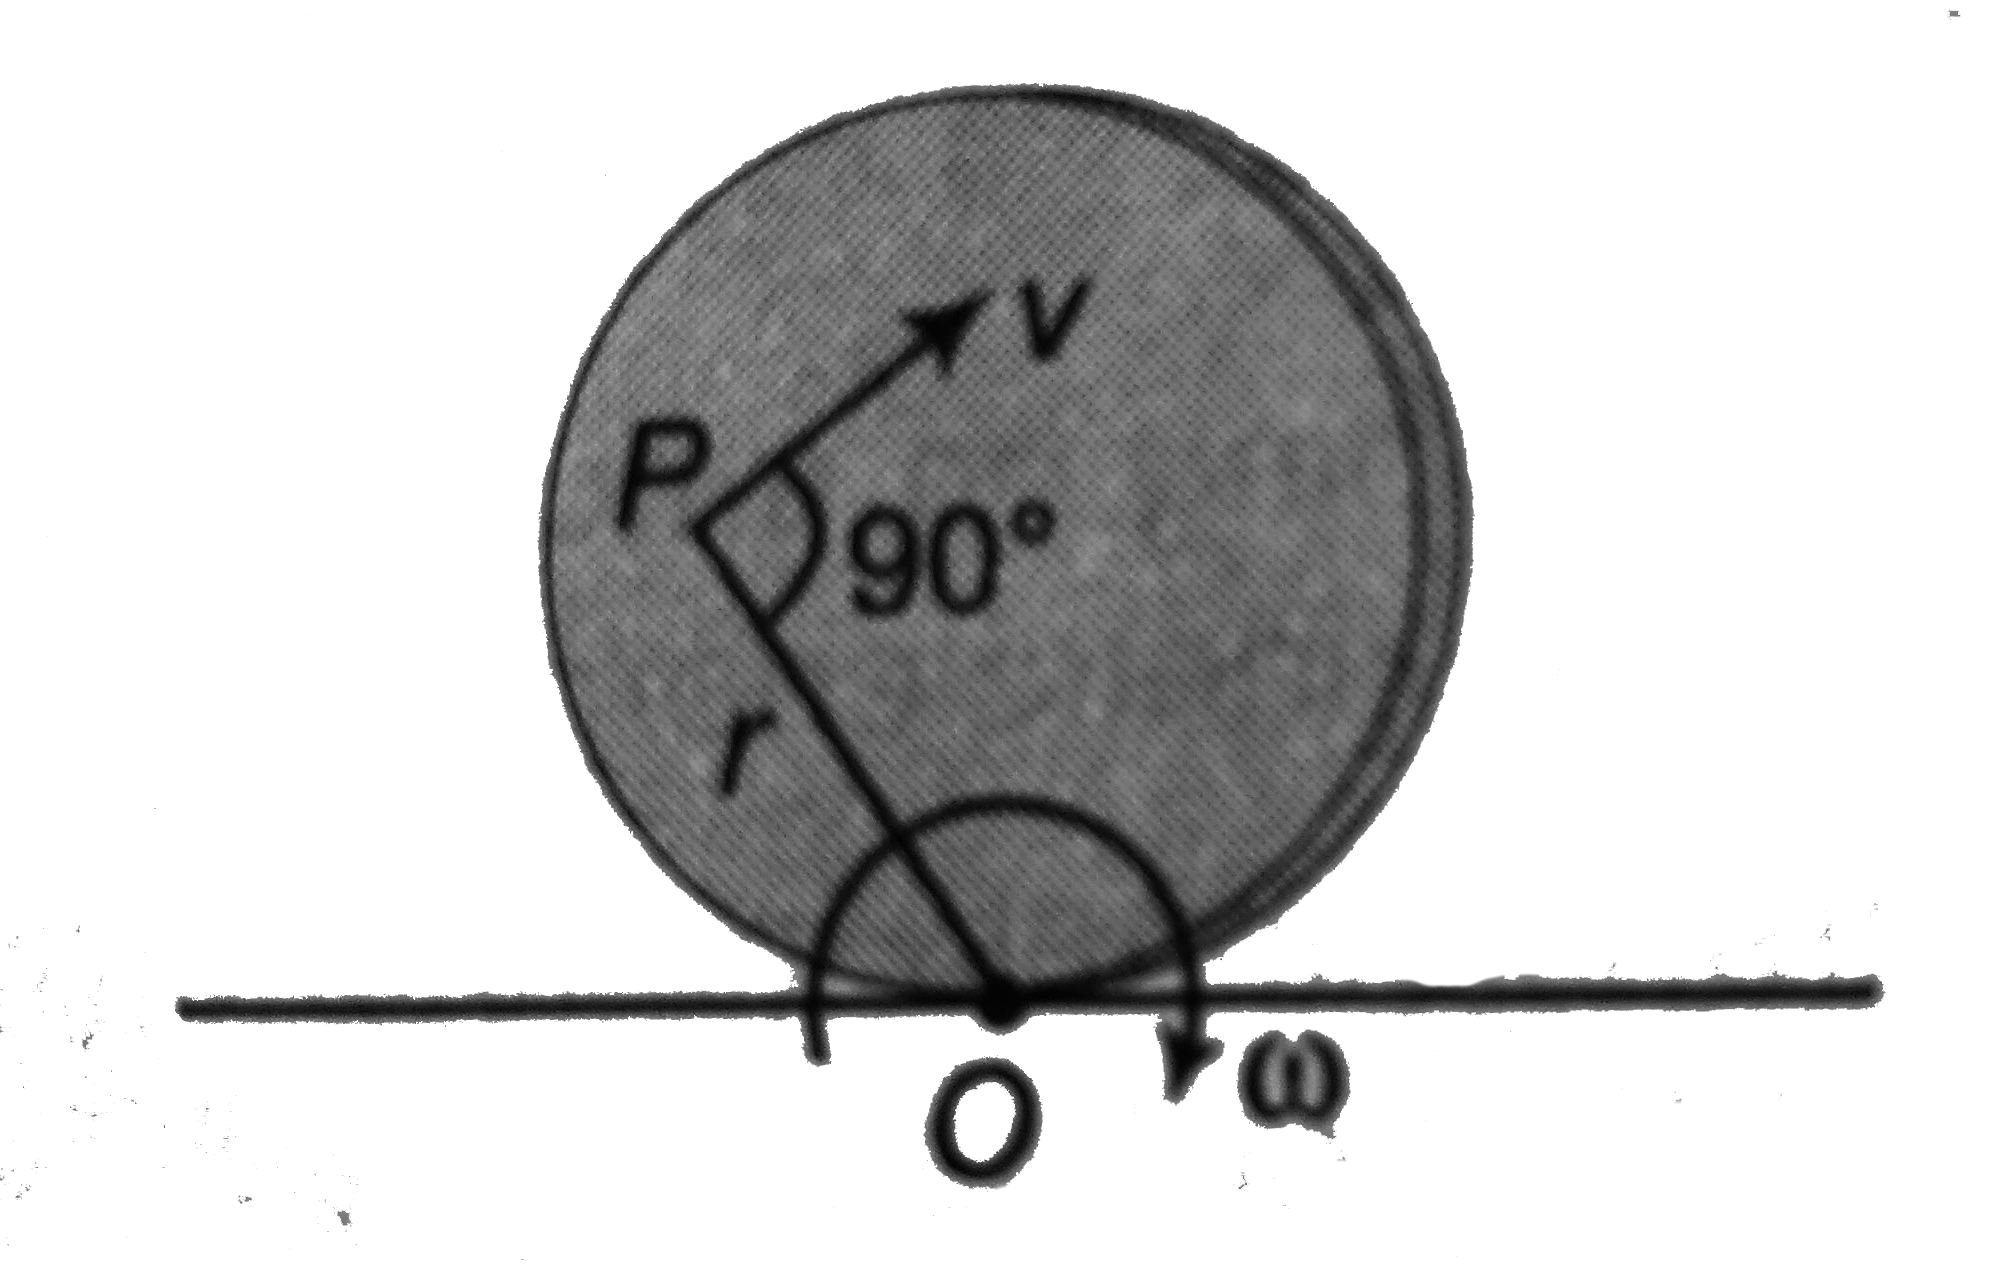 Using the concept of instantaneous axis of rotation. Find speed of particle P as shown in figure, under pure rolling condition.